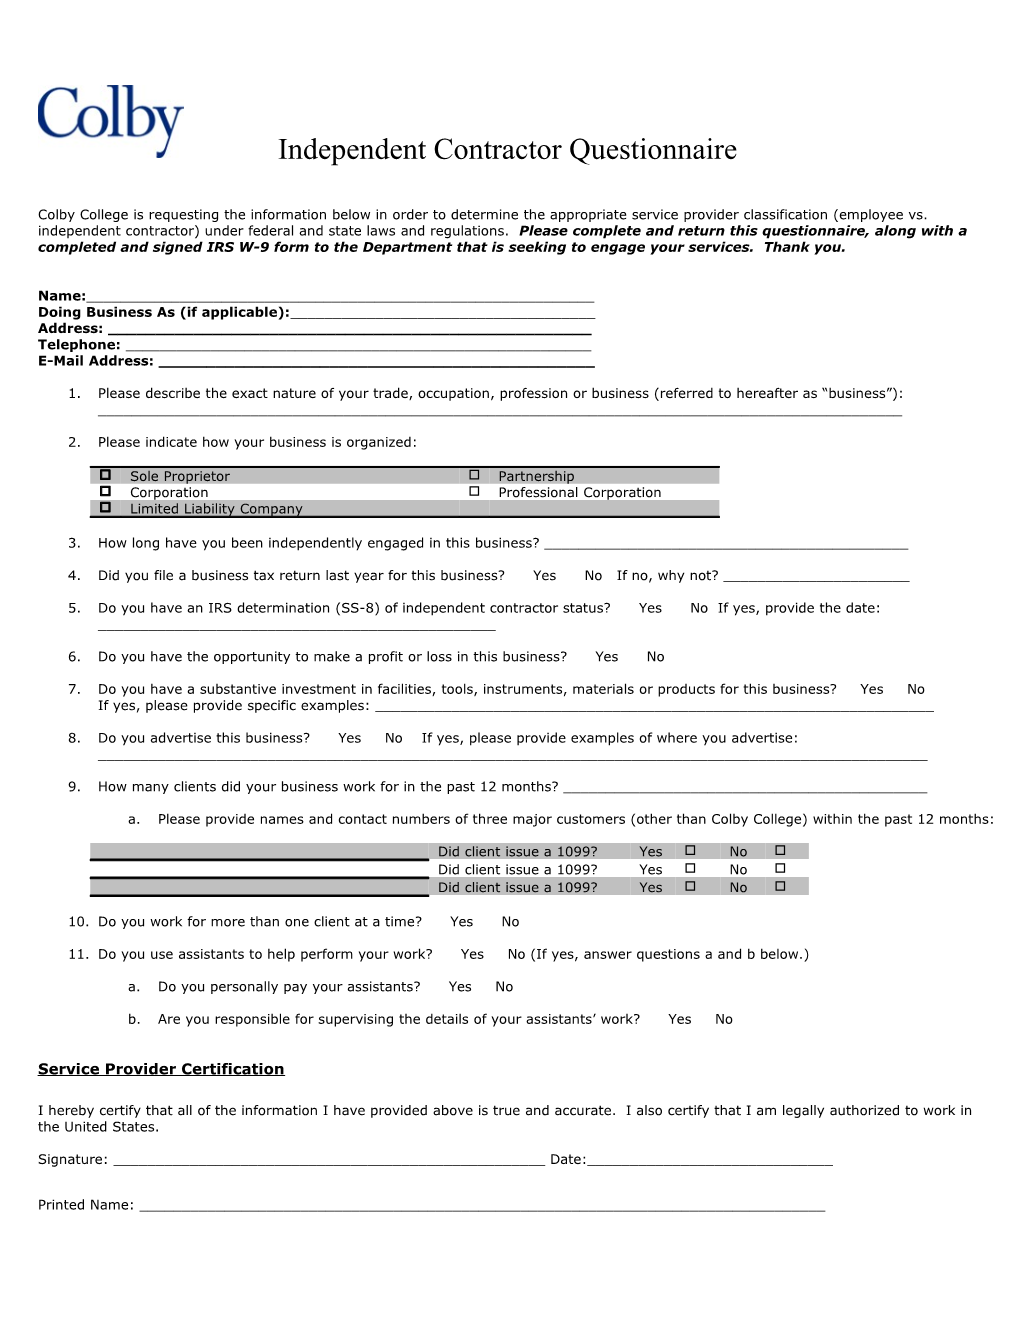 Independent Contractor Questionnaire